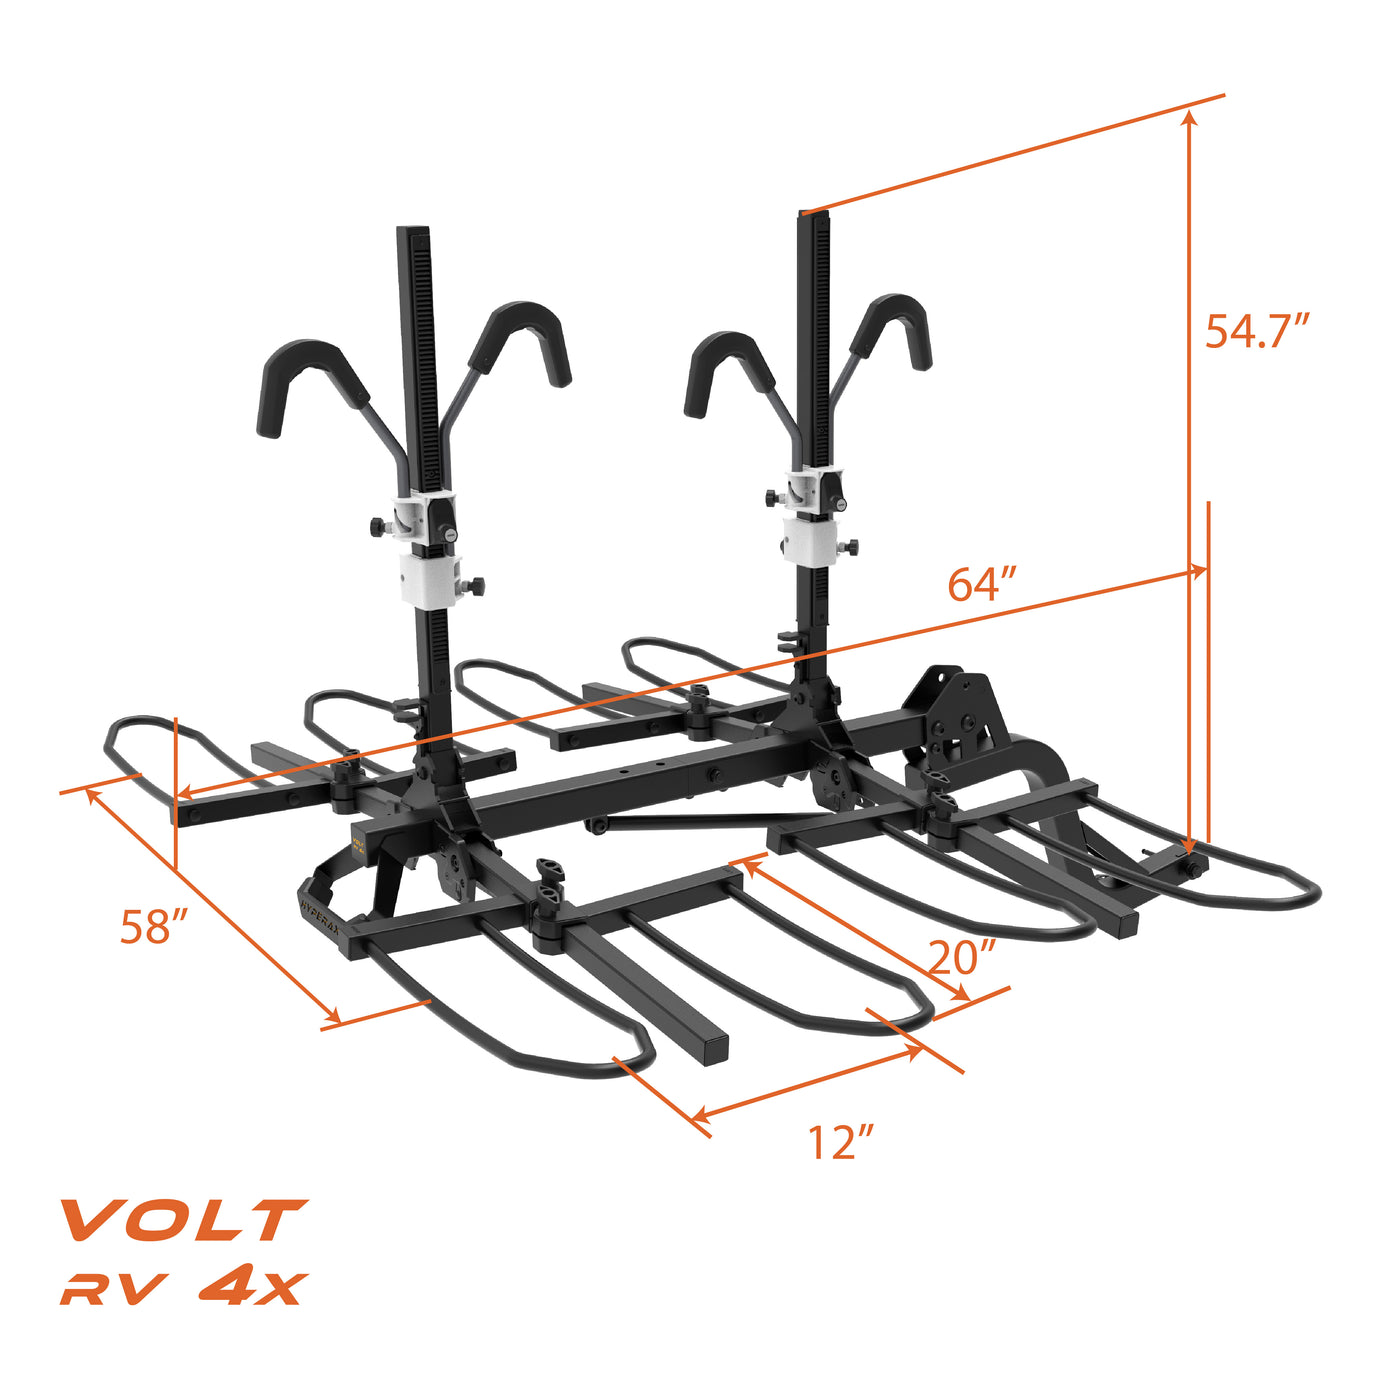 VOLT RV 4X FREE WHEEL DOLLY +2x SMALL WHEEL ADAPTER + STEEL LOCKING CABLE